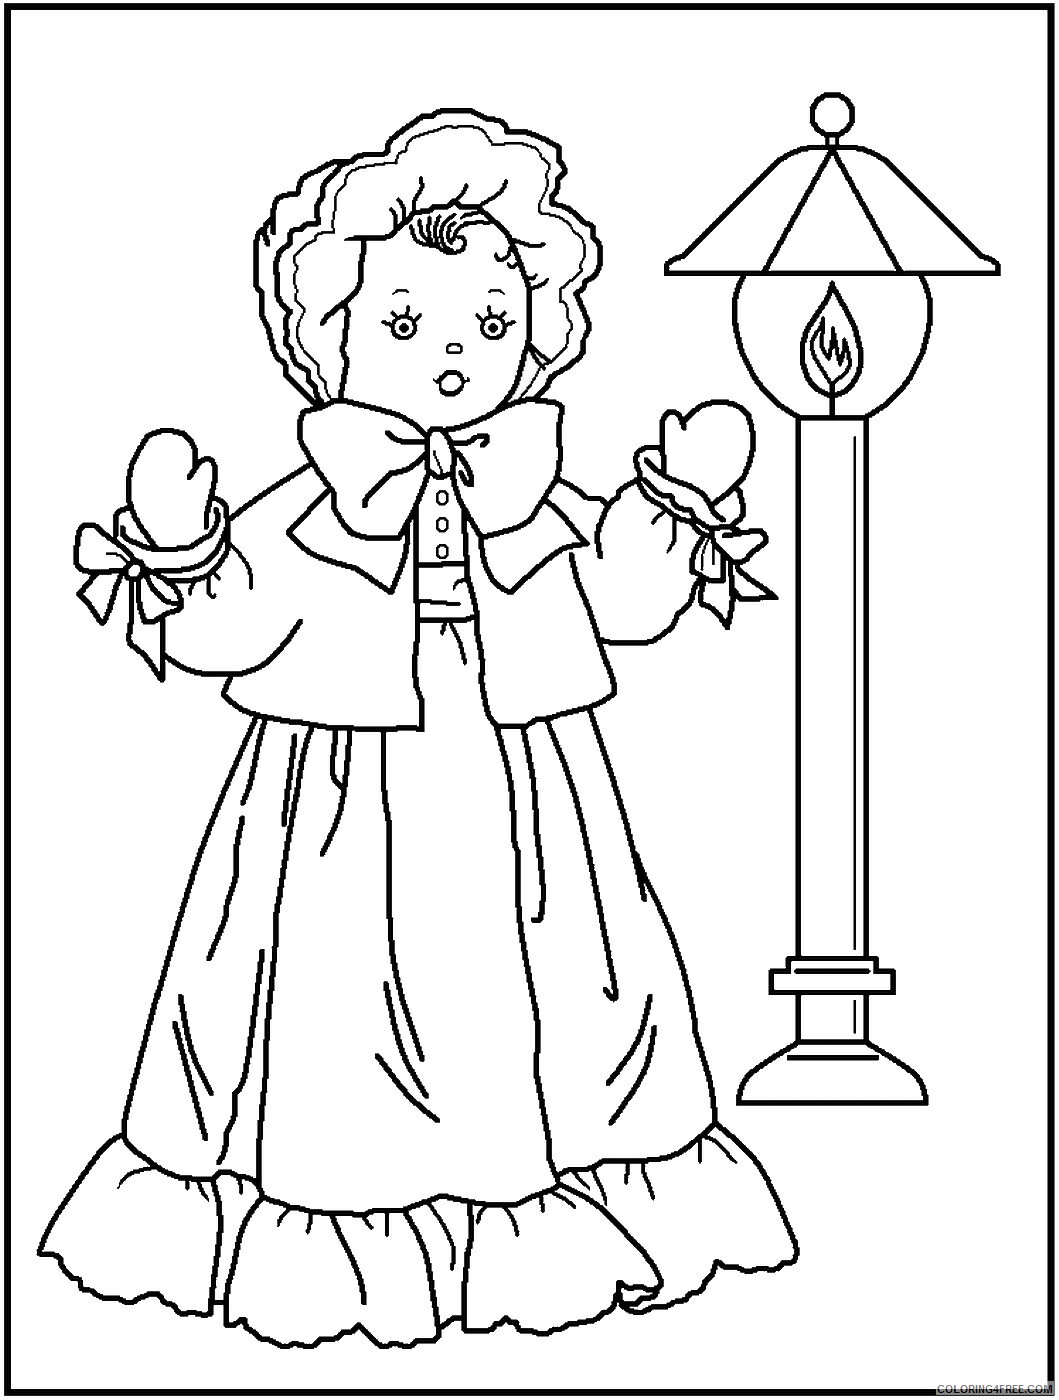 Doll Coloring Pages for Girls dolls_50 Printable 2021 0386 Coloring4free